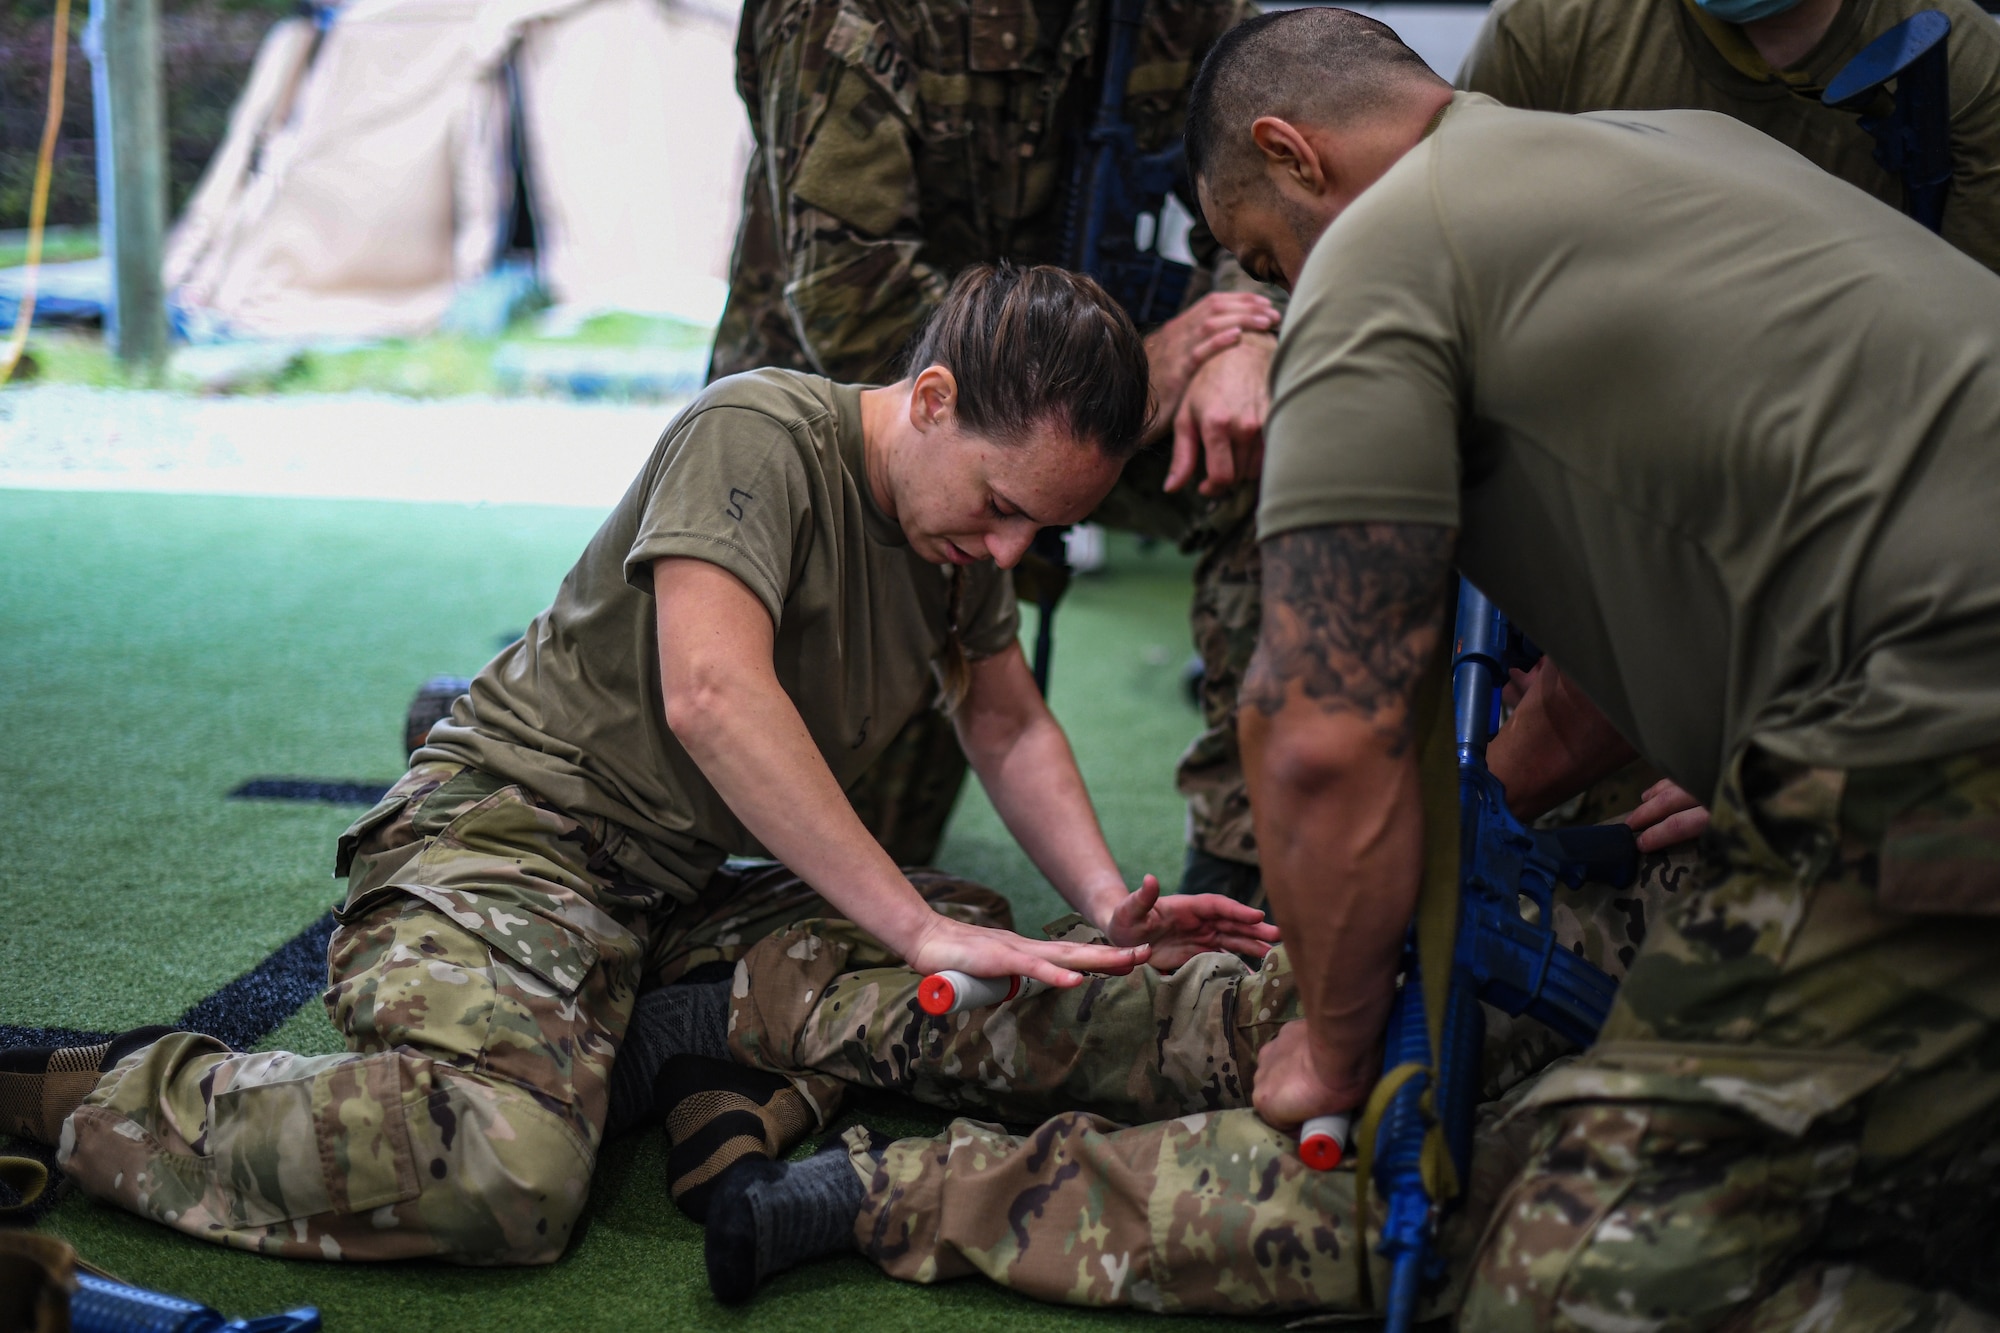 Special Operations Surgical Team candidates participate in a medical scenario performing emergency medical procedures